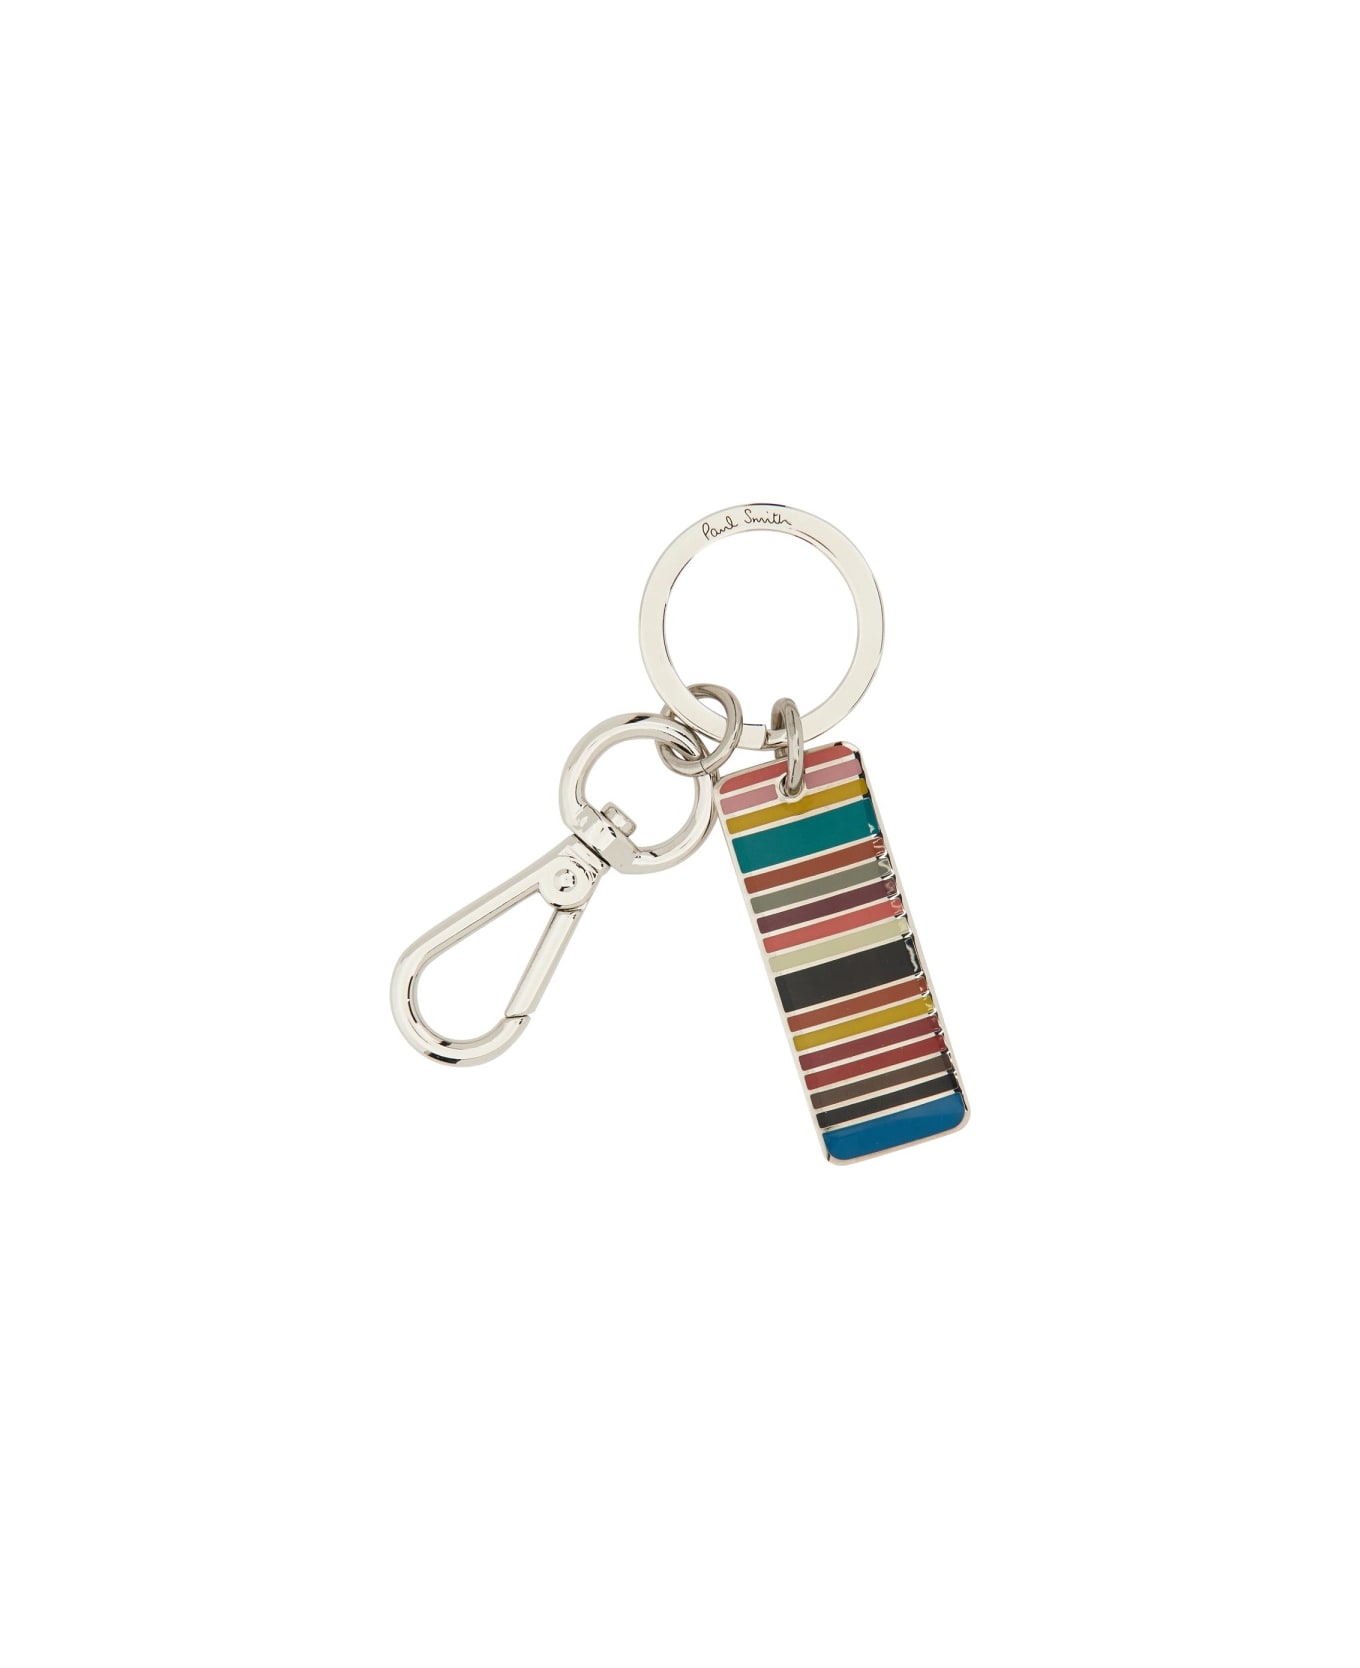 Paul Smith Key Holder With Logo - MULTICOLOUR キーリング